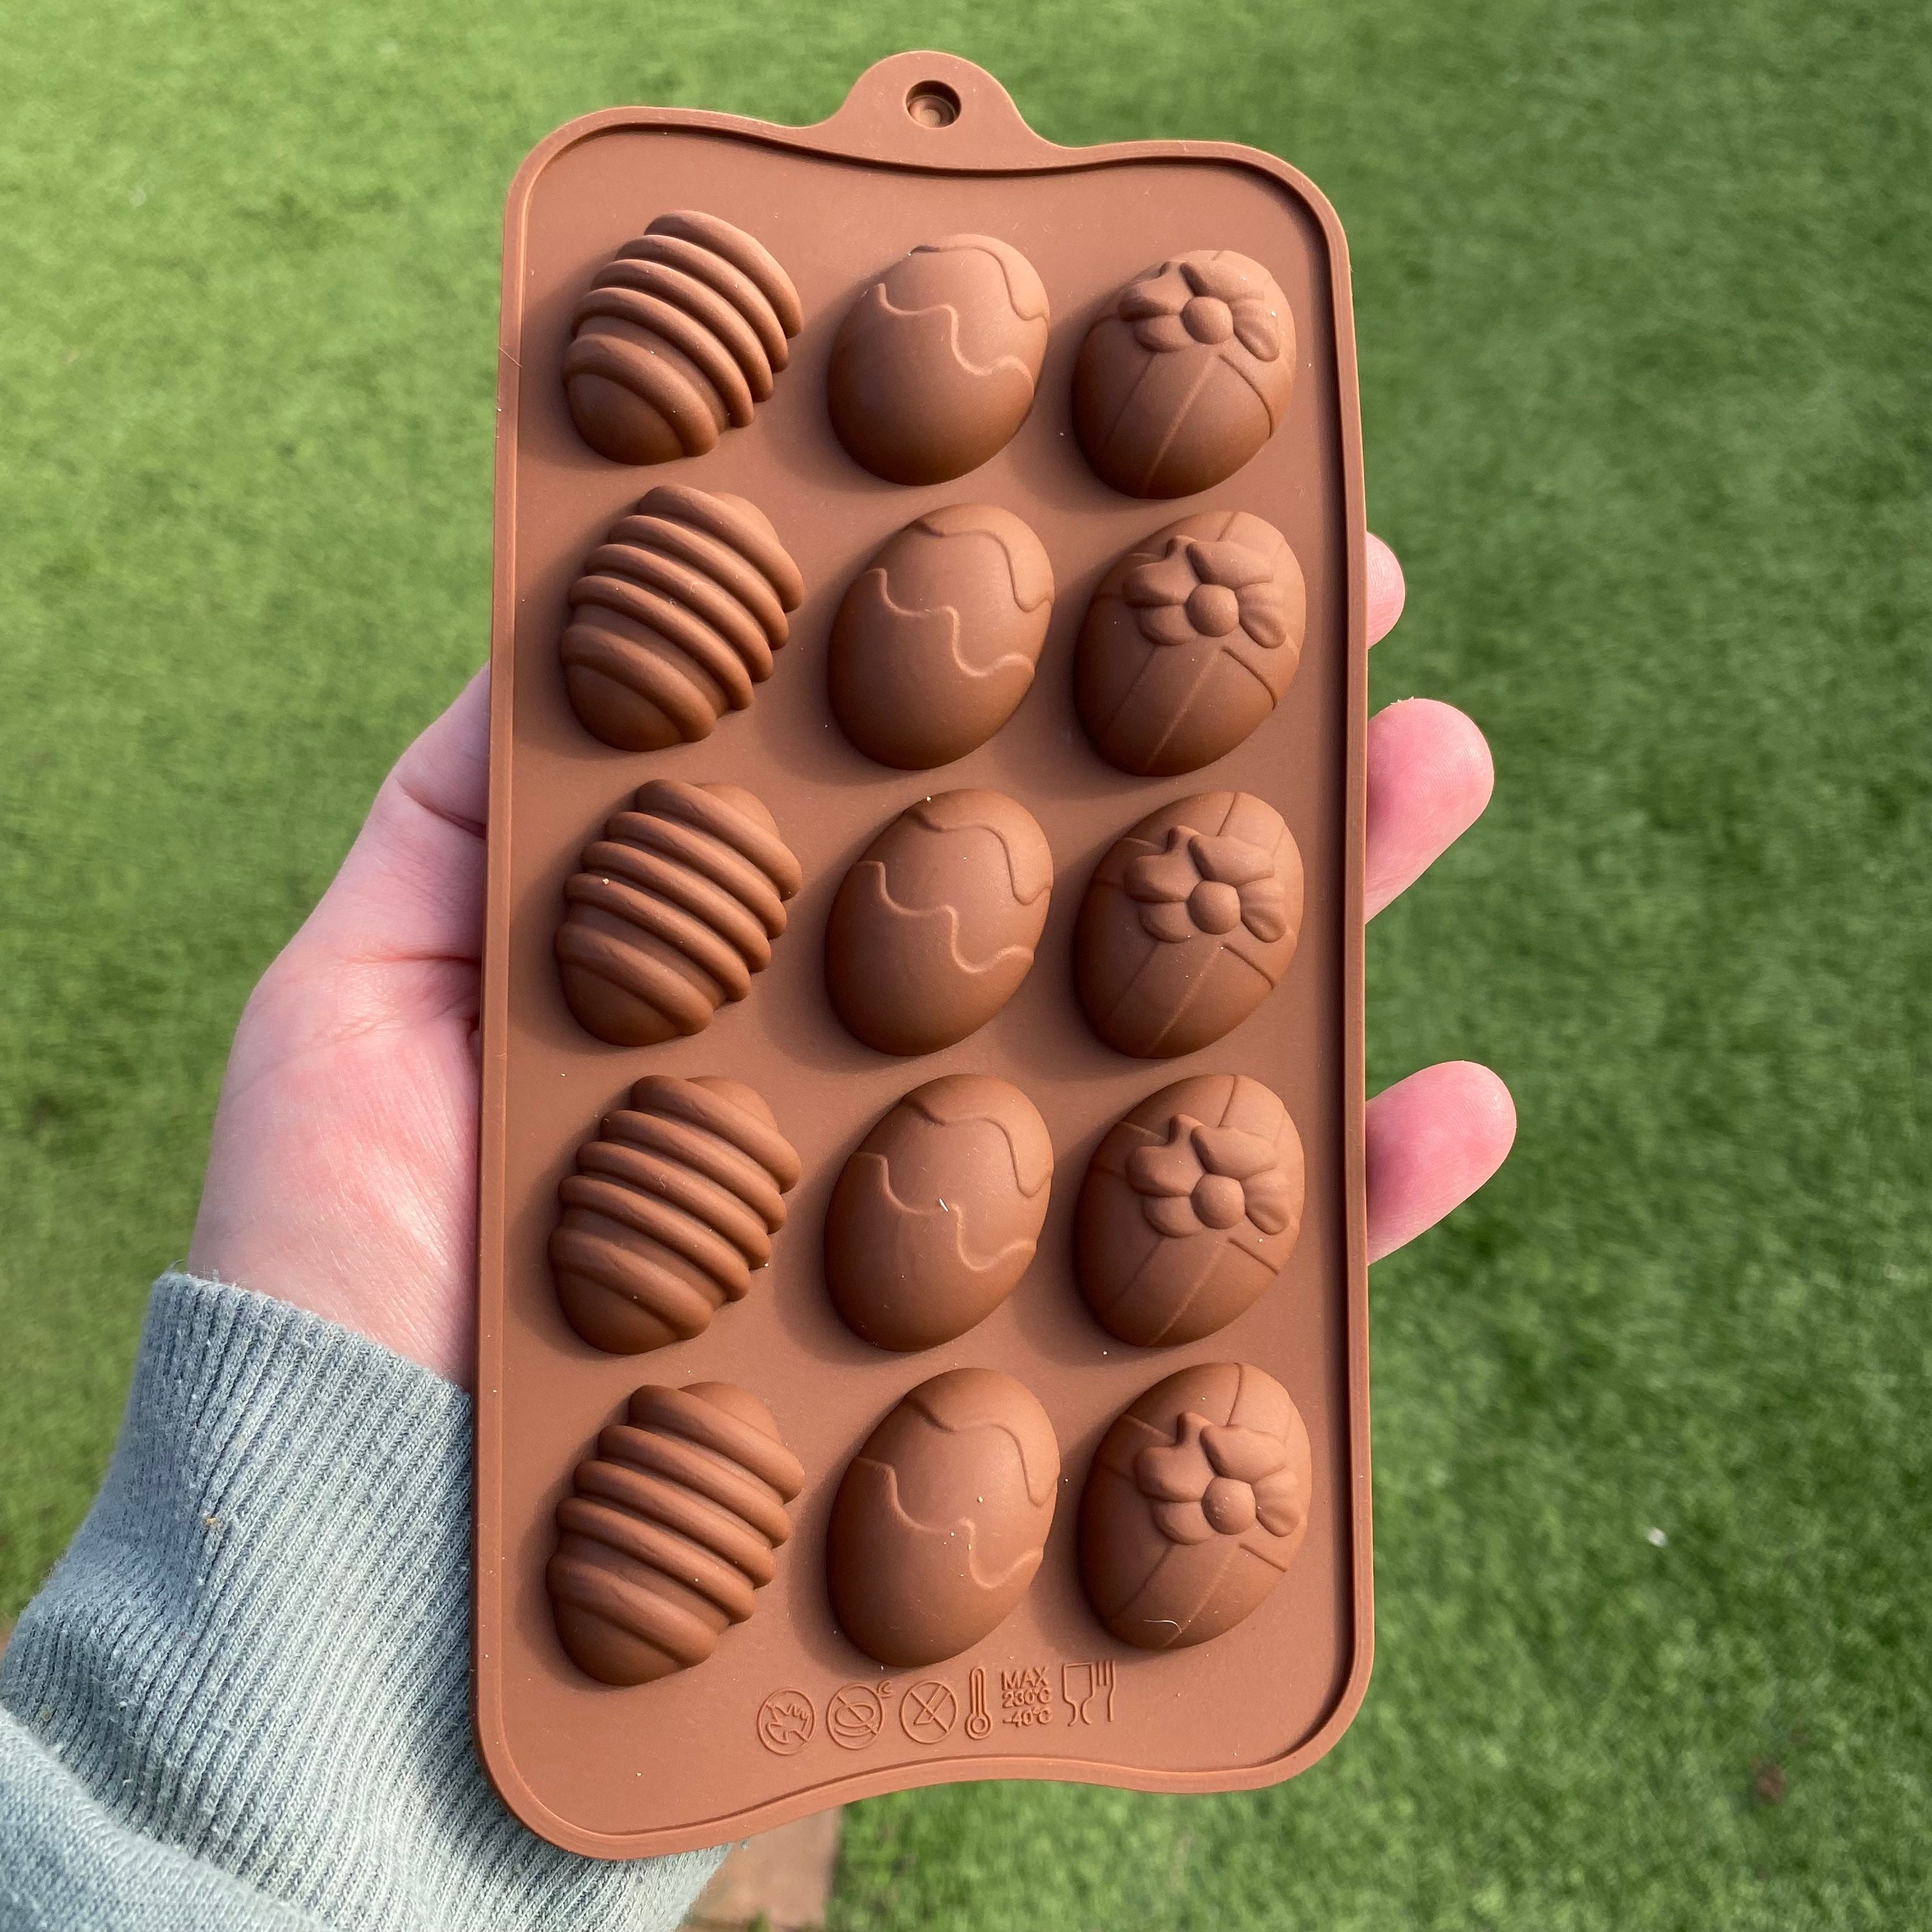 Fsqjgq Wax Melt Molds Silicone Mould Silicone for Easter for Chocolate Mould Chocolate Easter Baking Crumbly 3D Dessert Cake Mould Ceramic Muffin Pan